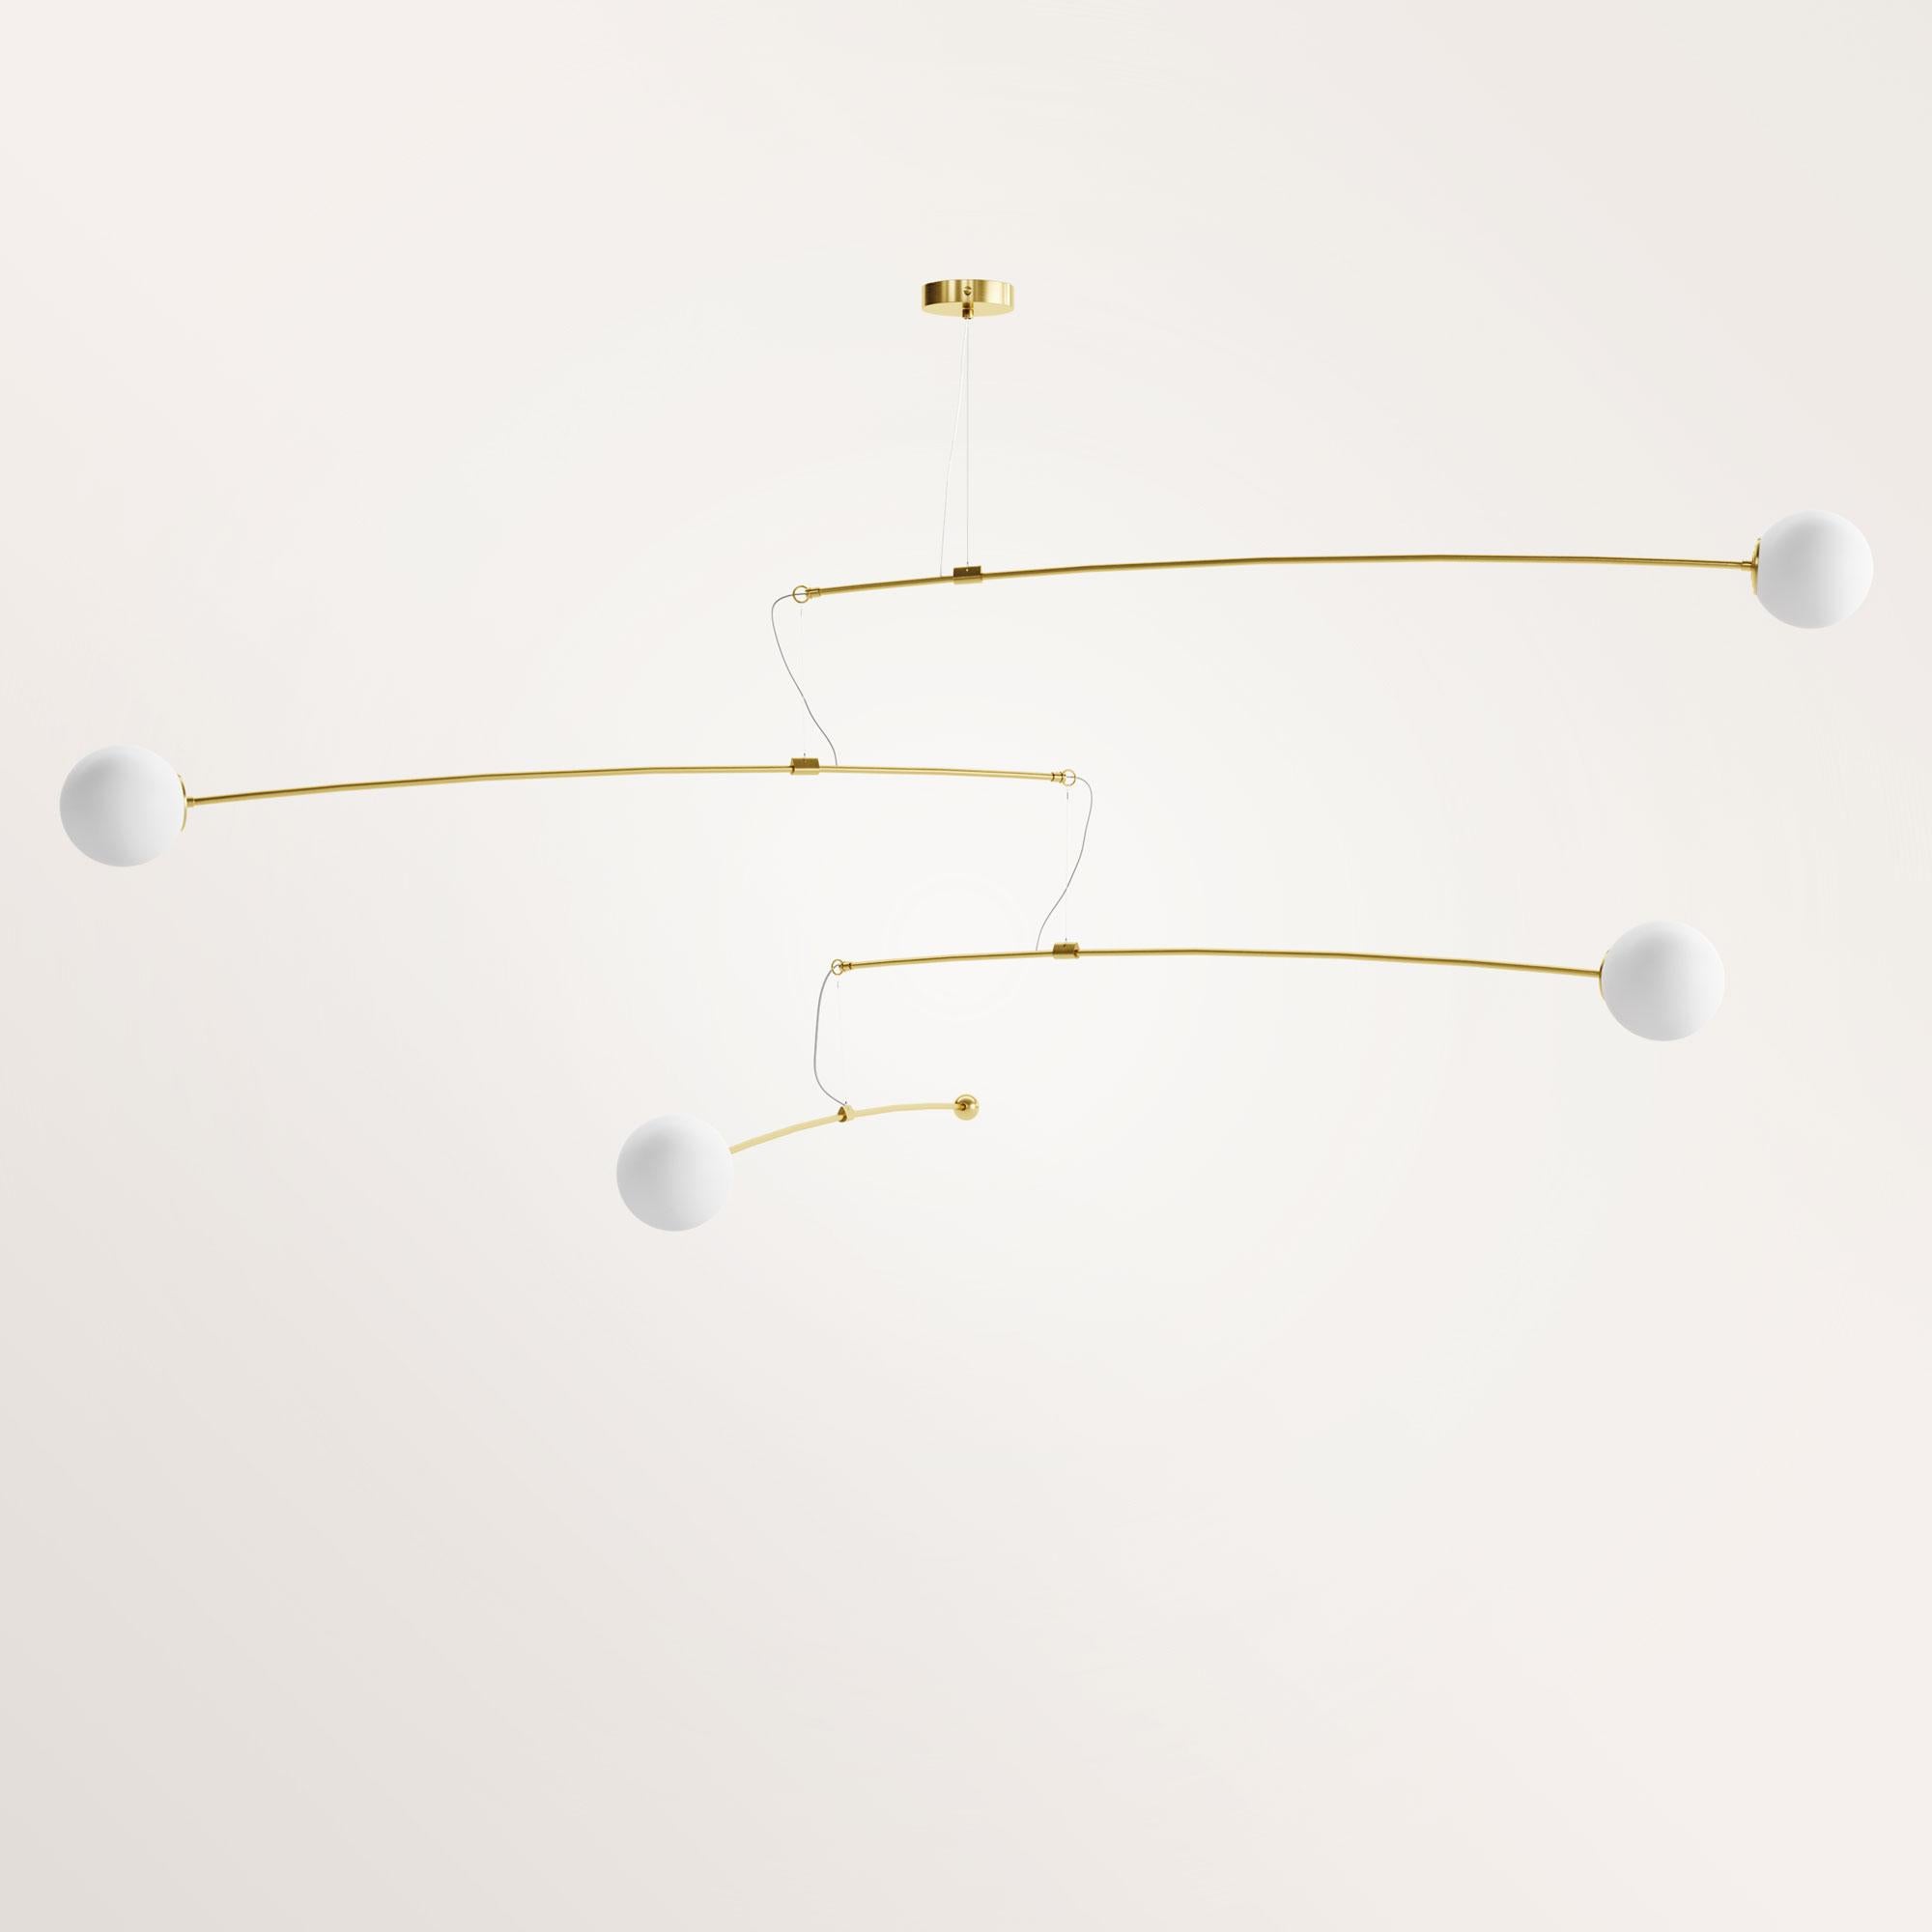 Handmade medium notos chandelier by Gobo Lights
Dimensions: L 180 x l 180 x H 61
Materials: Brass, opaline

Notos, The master of the violent south wind.

Self-taught and from the world of chemistry, this Belgian craftsman / designer designs